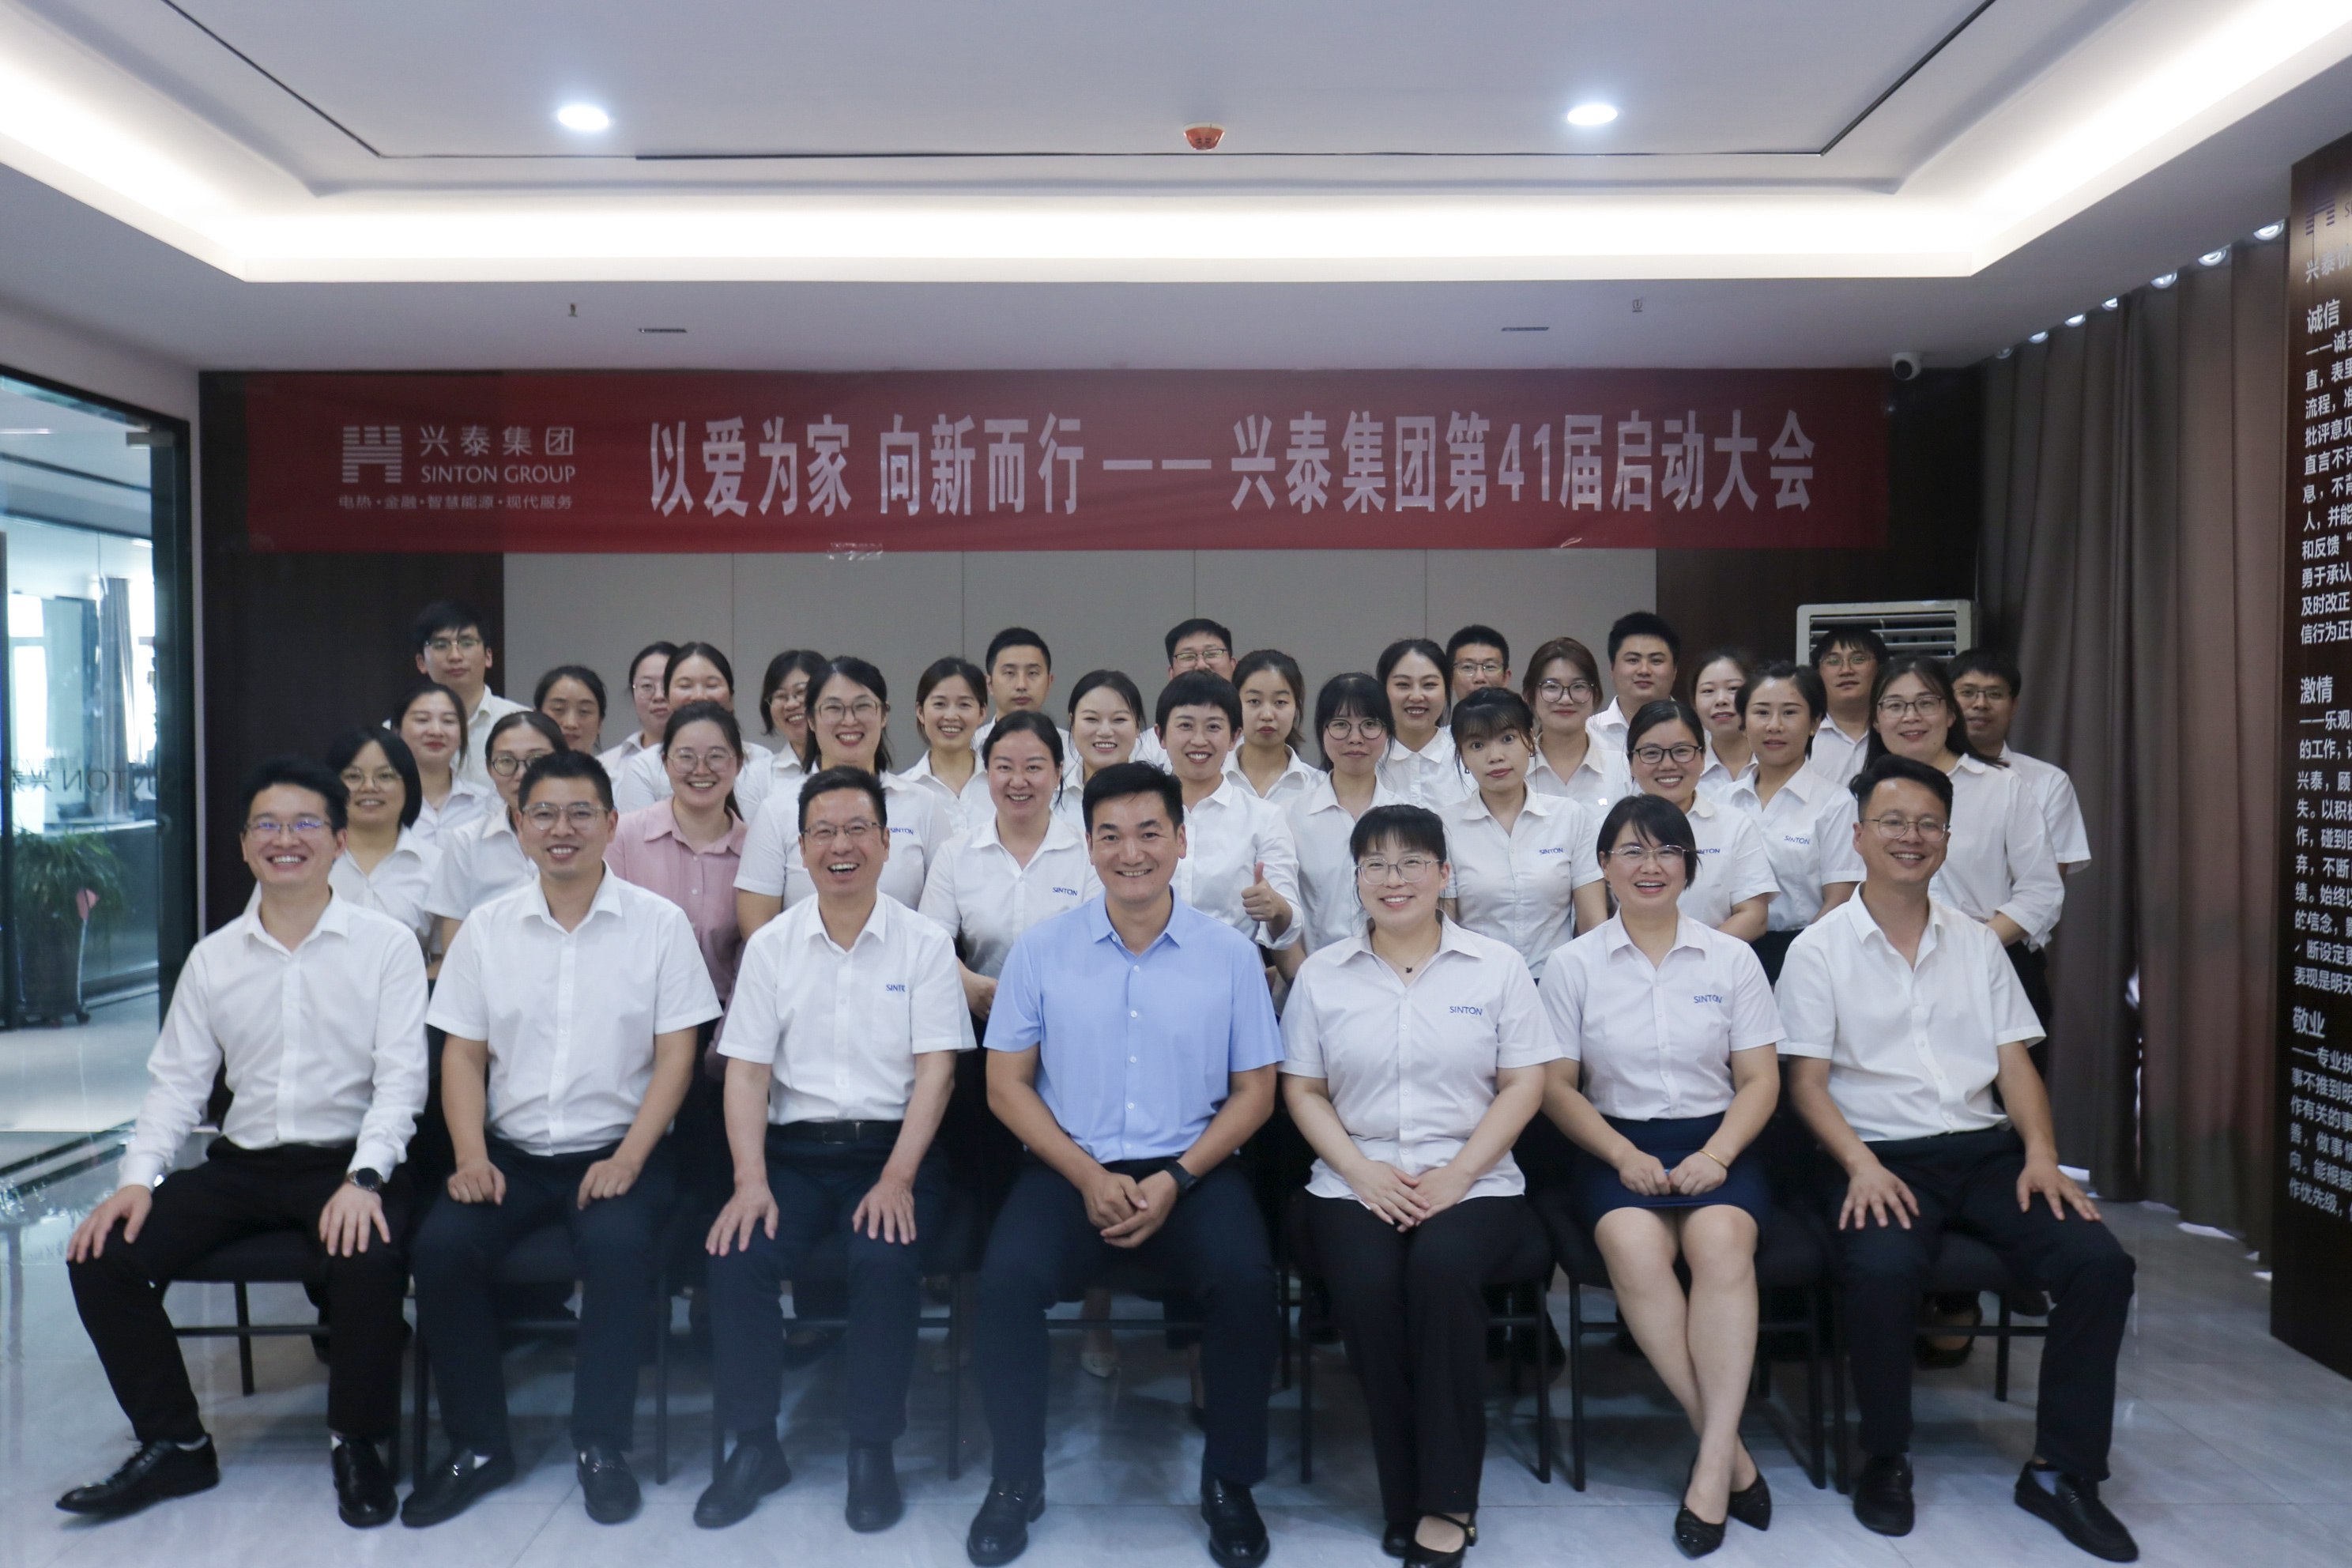 On the afternoon of July 12, Xingtai Group successfully held the 41st launch conference with the theme of "Love as home, to the New". Wang Fuhua, chairman of Xingtai Group, Sun Jianqiang, deputy general manager of Xingtai Group and the heads of all branches and representatives of employees participated in the meeting. This launch meeting is not only a summary and commendation of the group’s work achievements in the first half of the year, but also a new outlook and a new start for future development.